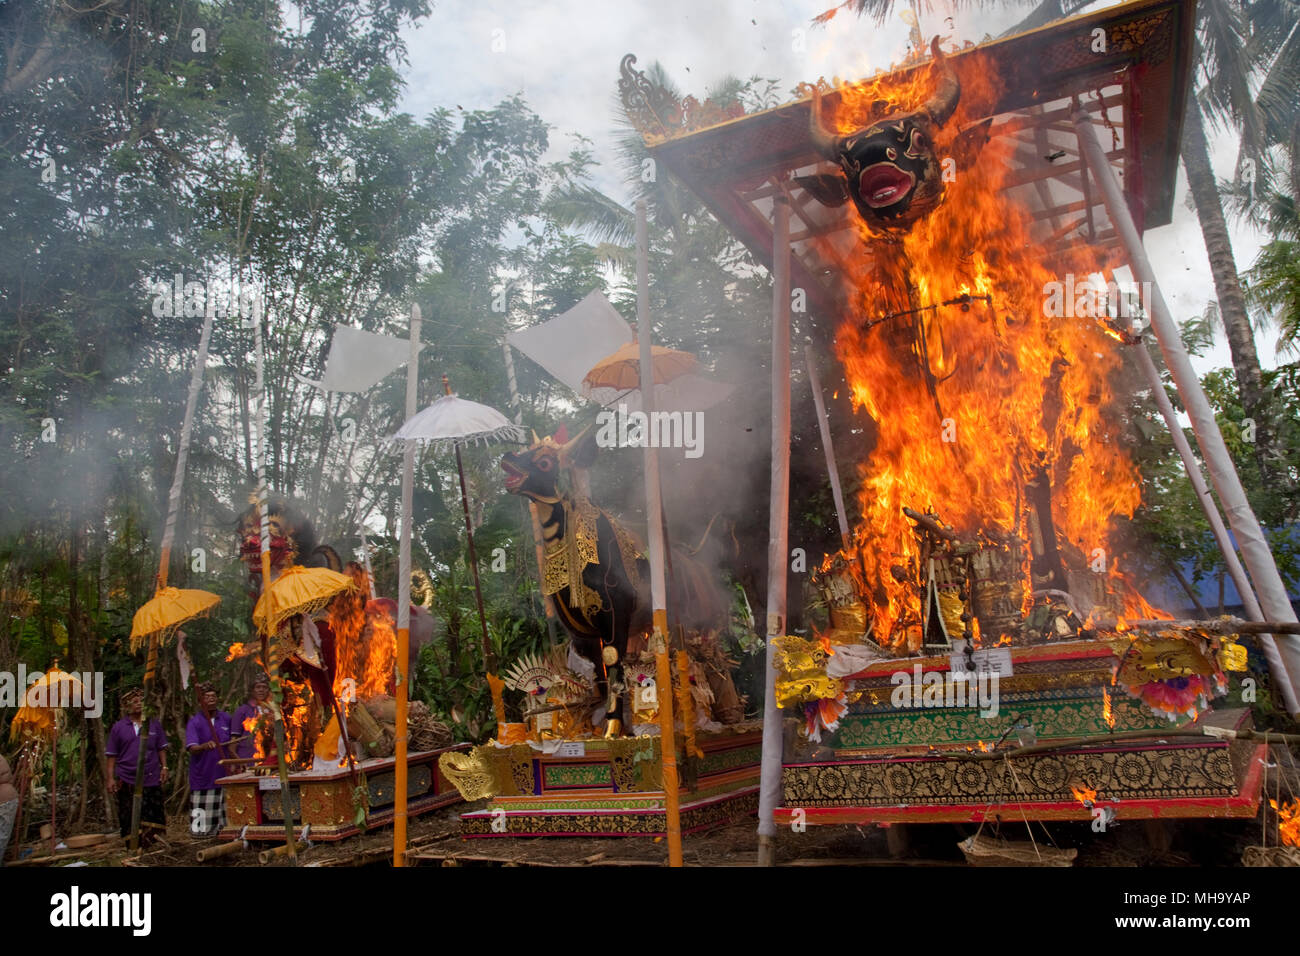 People gather for mass funeral at Penestenan village cremation ground, Bali Stock Photo